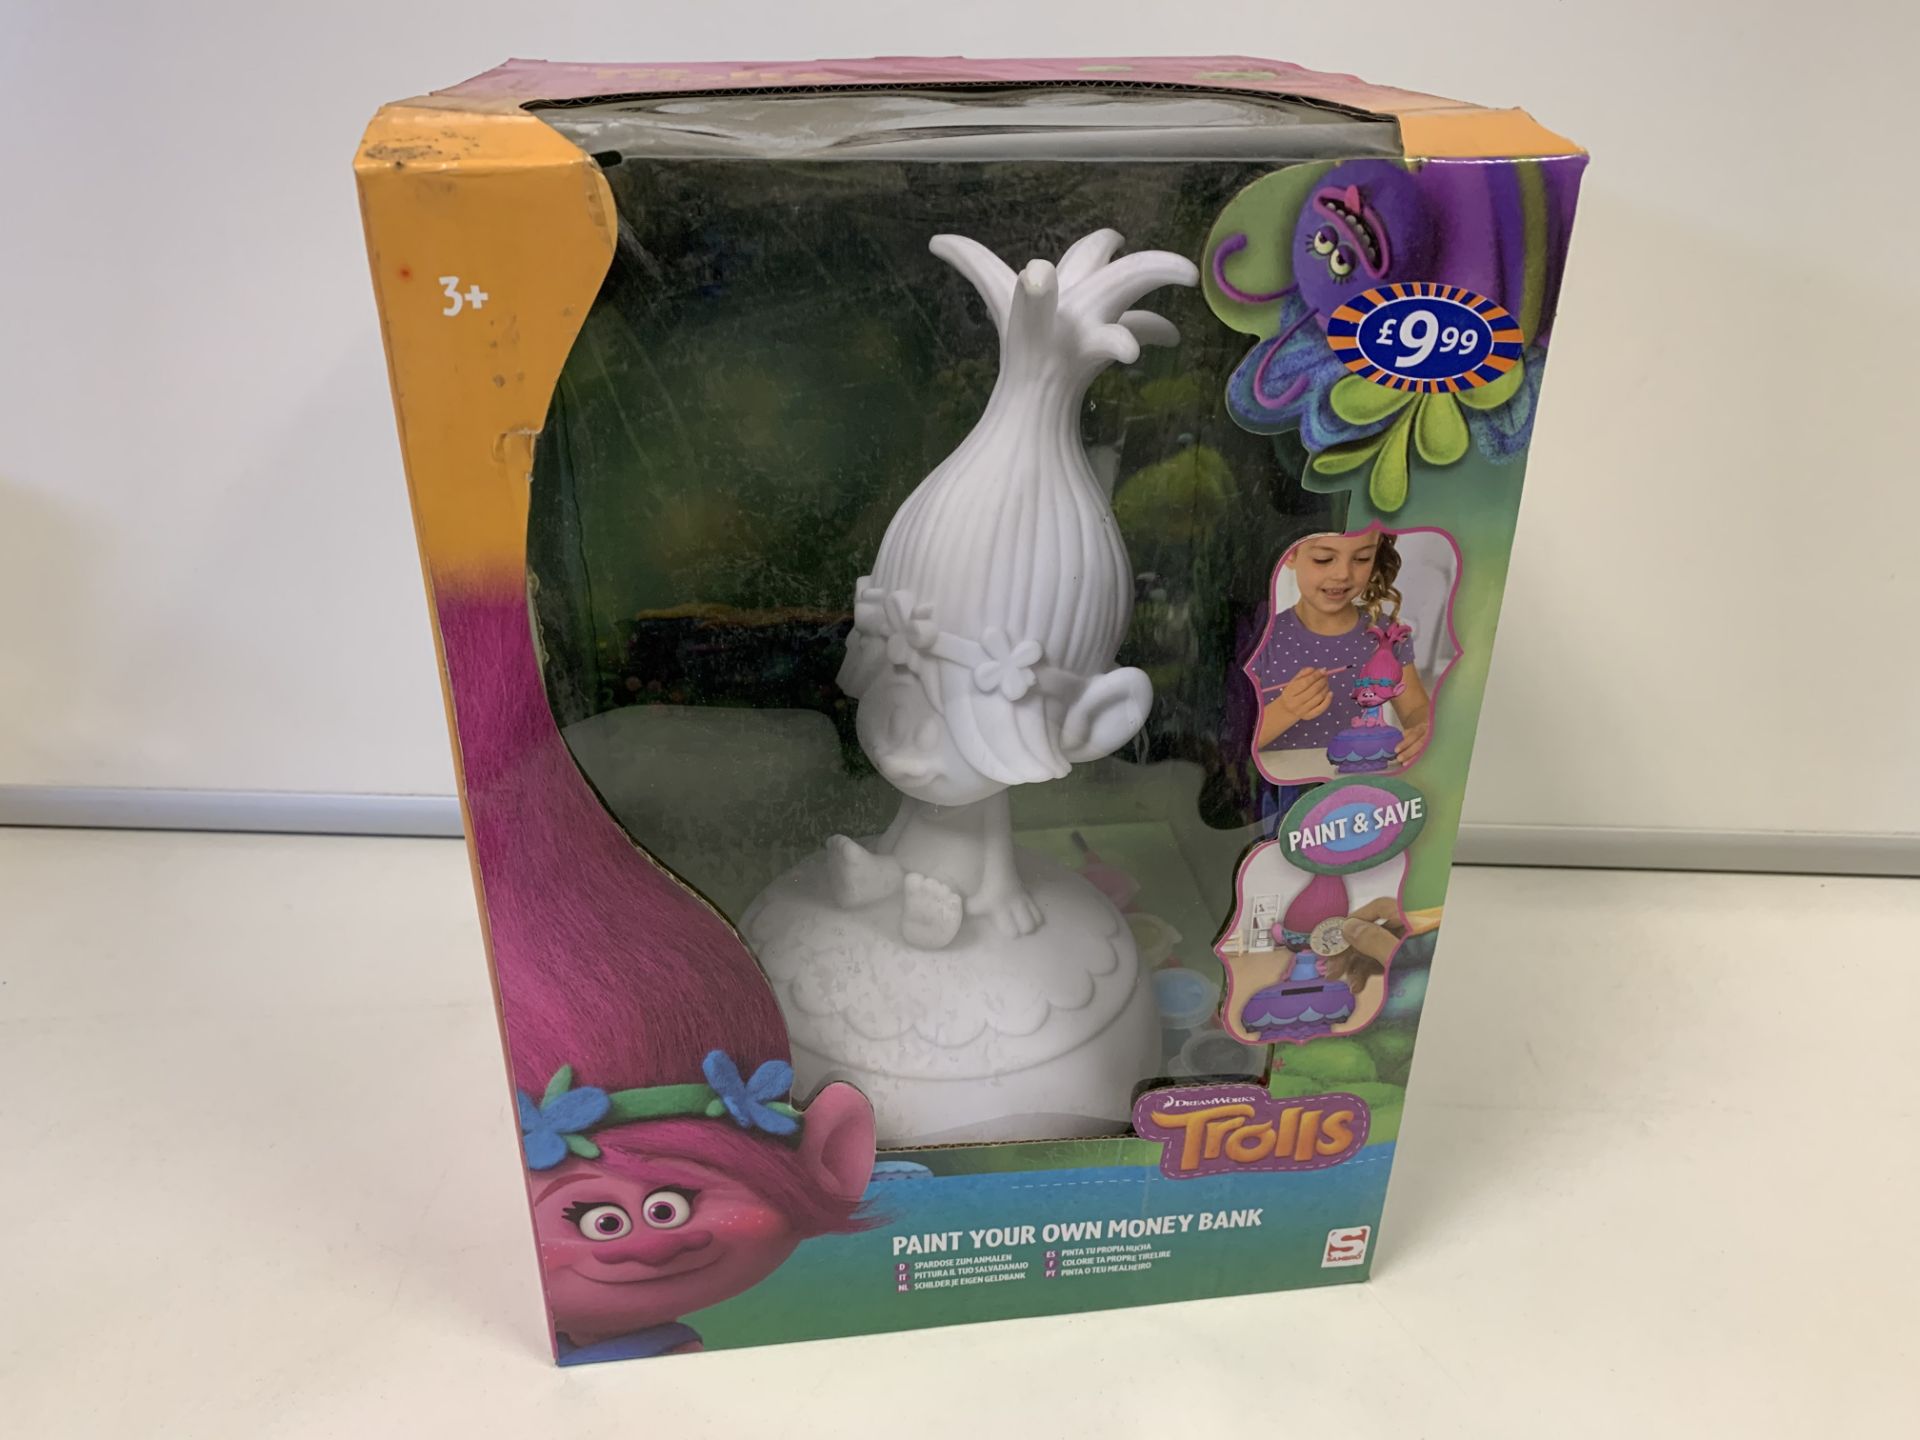 15 X BRAND NEW TROLLS PAINT YOUR OWN MONEY BOX (SOME BOXES MAY HAVE SLIGHT DAMAGE)